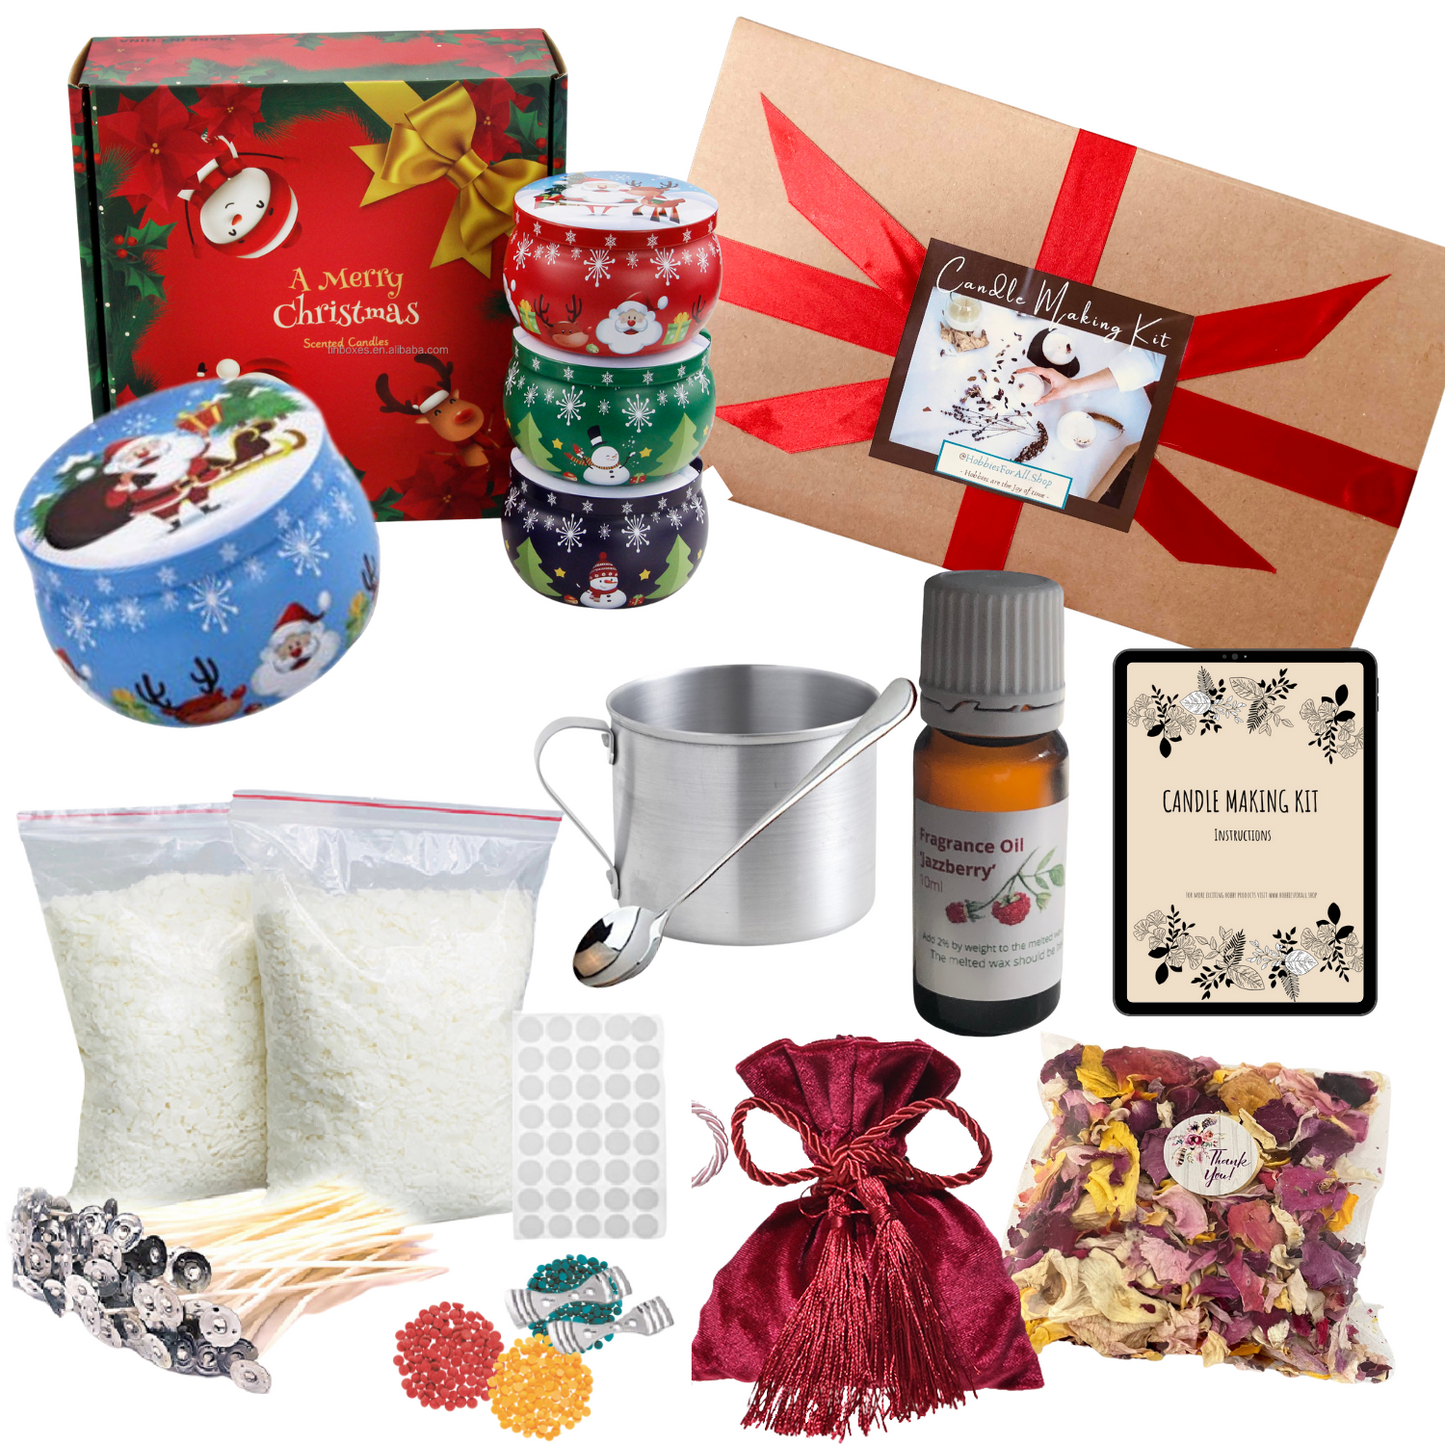 Hand Crafted Soy Wax Candle Making Kits - Bohemian, Floral, Inspiration, Orchard, Christmas & Nature